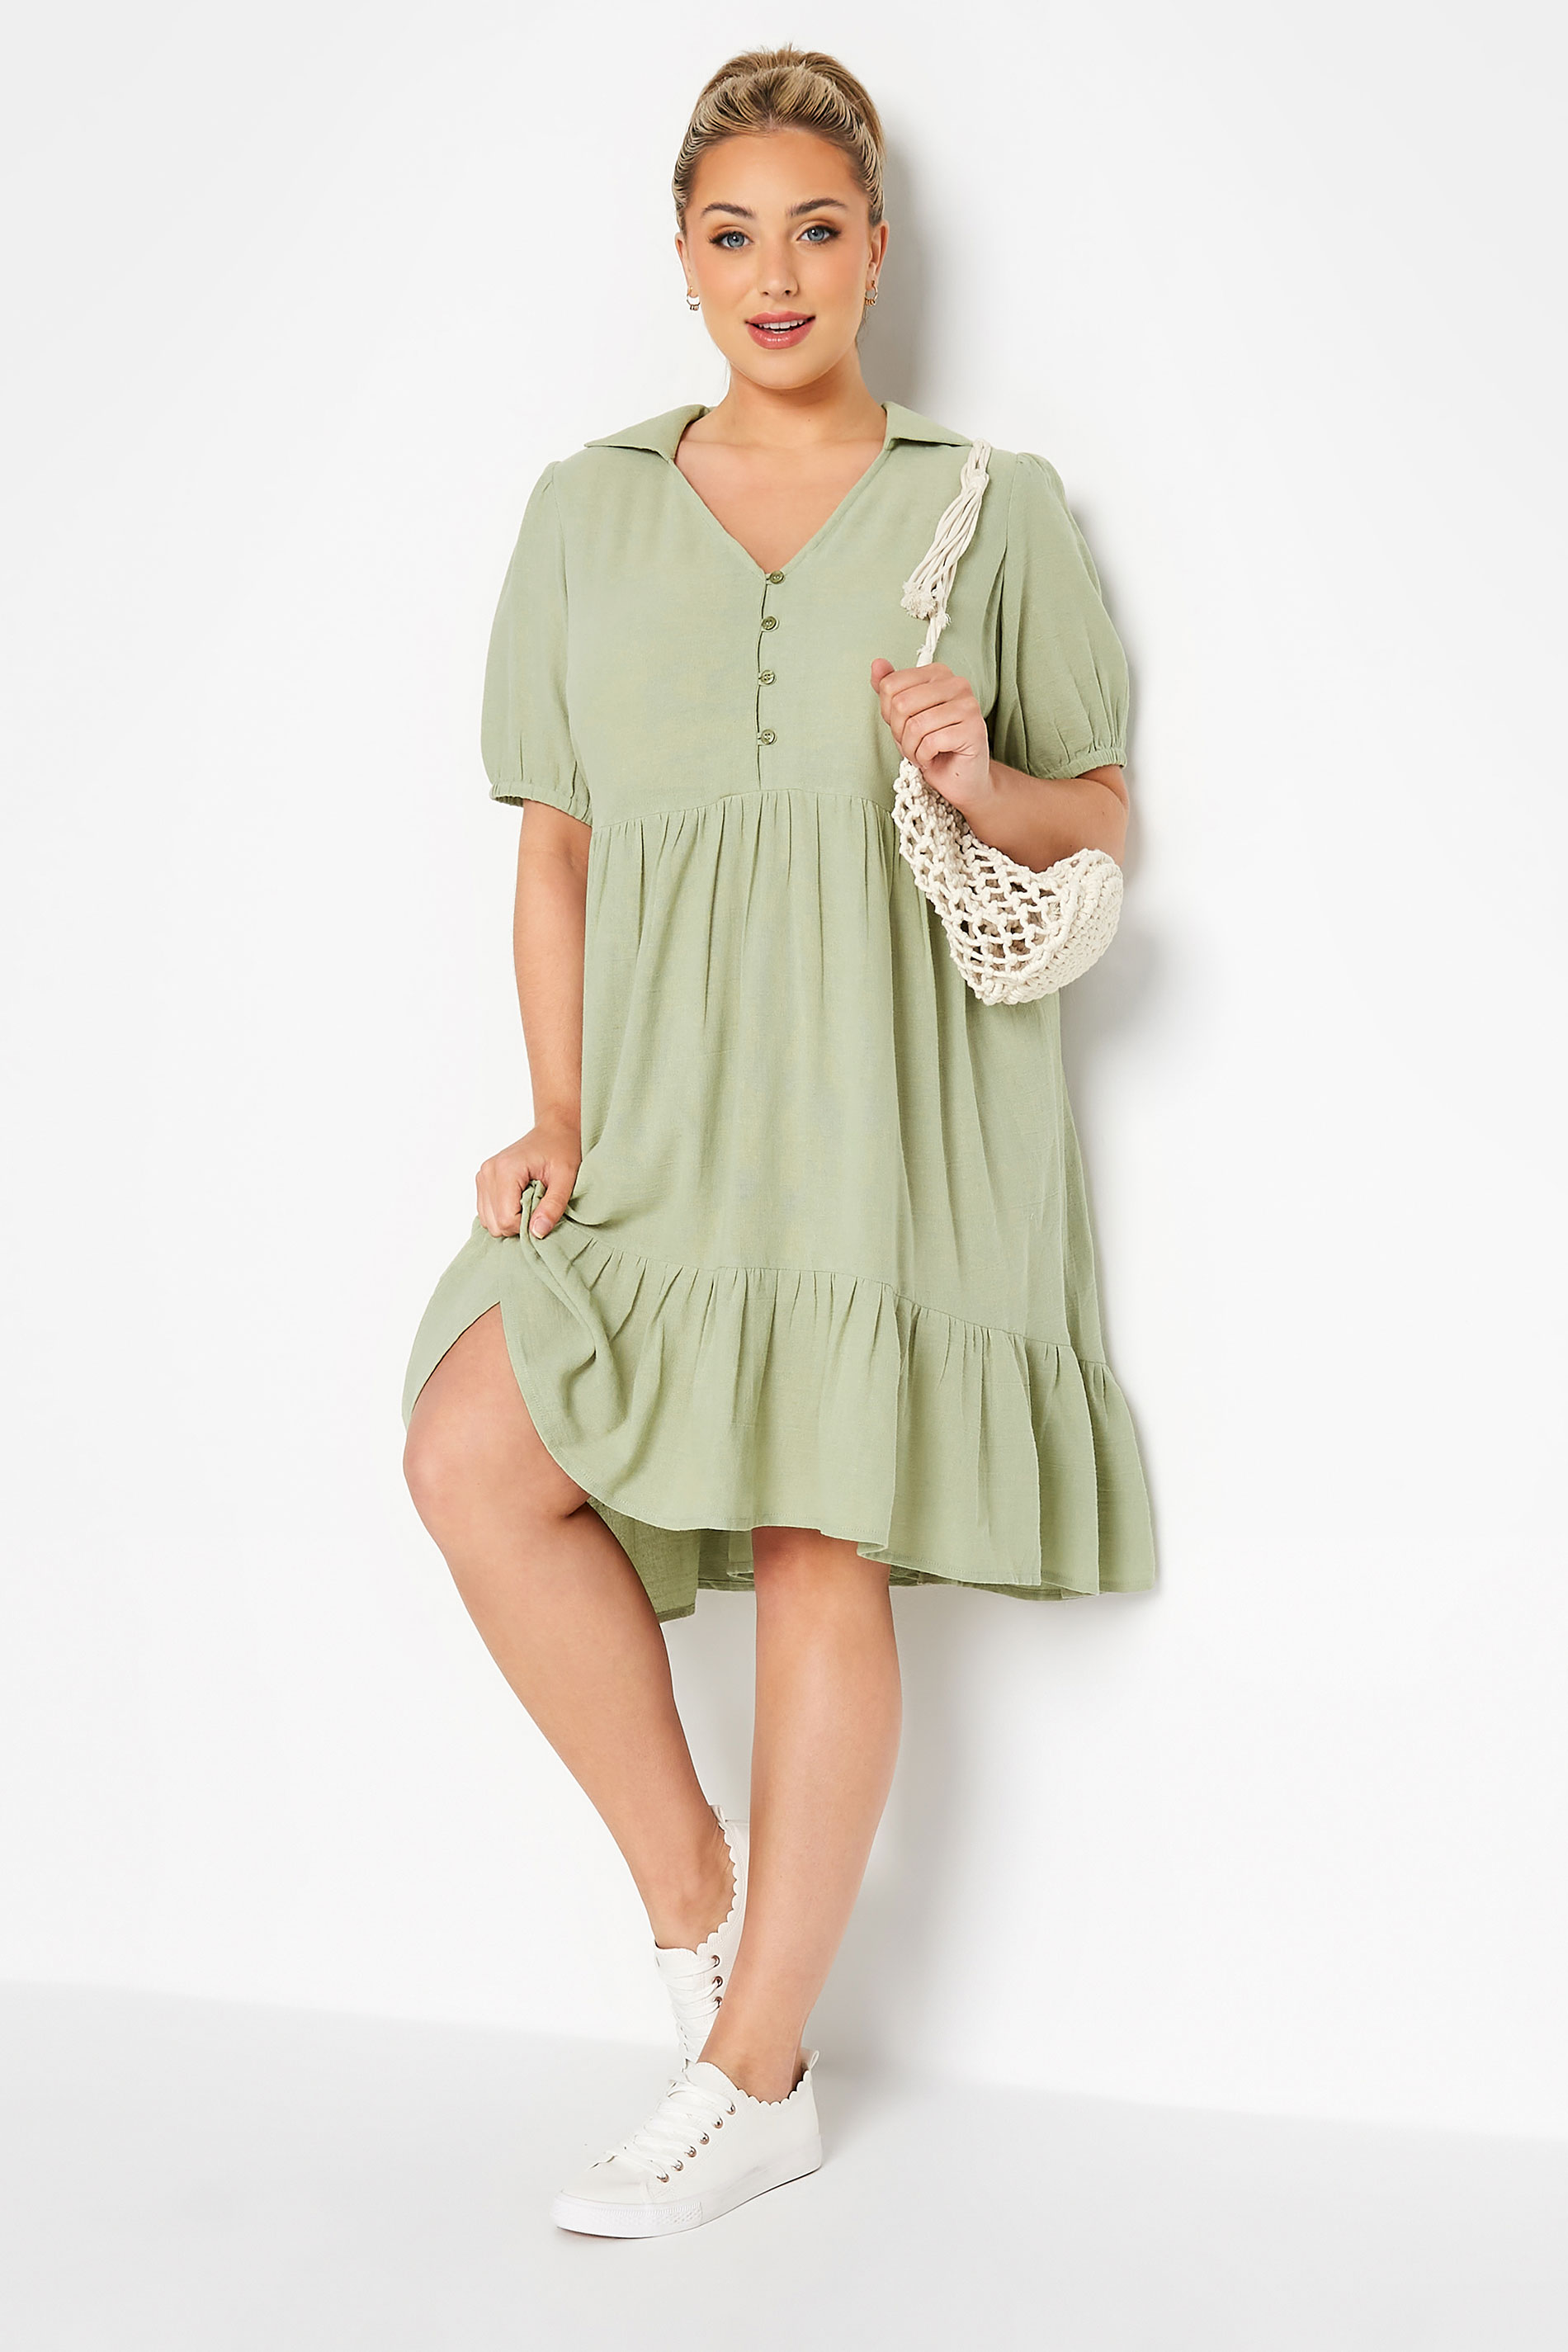 Robes Grande Taille Grande taille  Robes Mi-Longue | LIMITED COLLECTION - Robe Verte Pastel Manches Courtes Volantée - UX51127